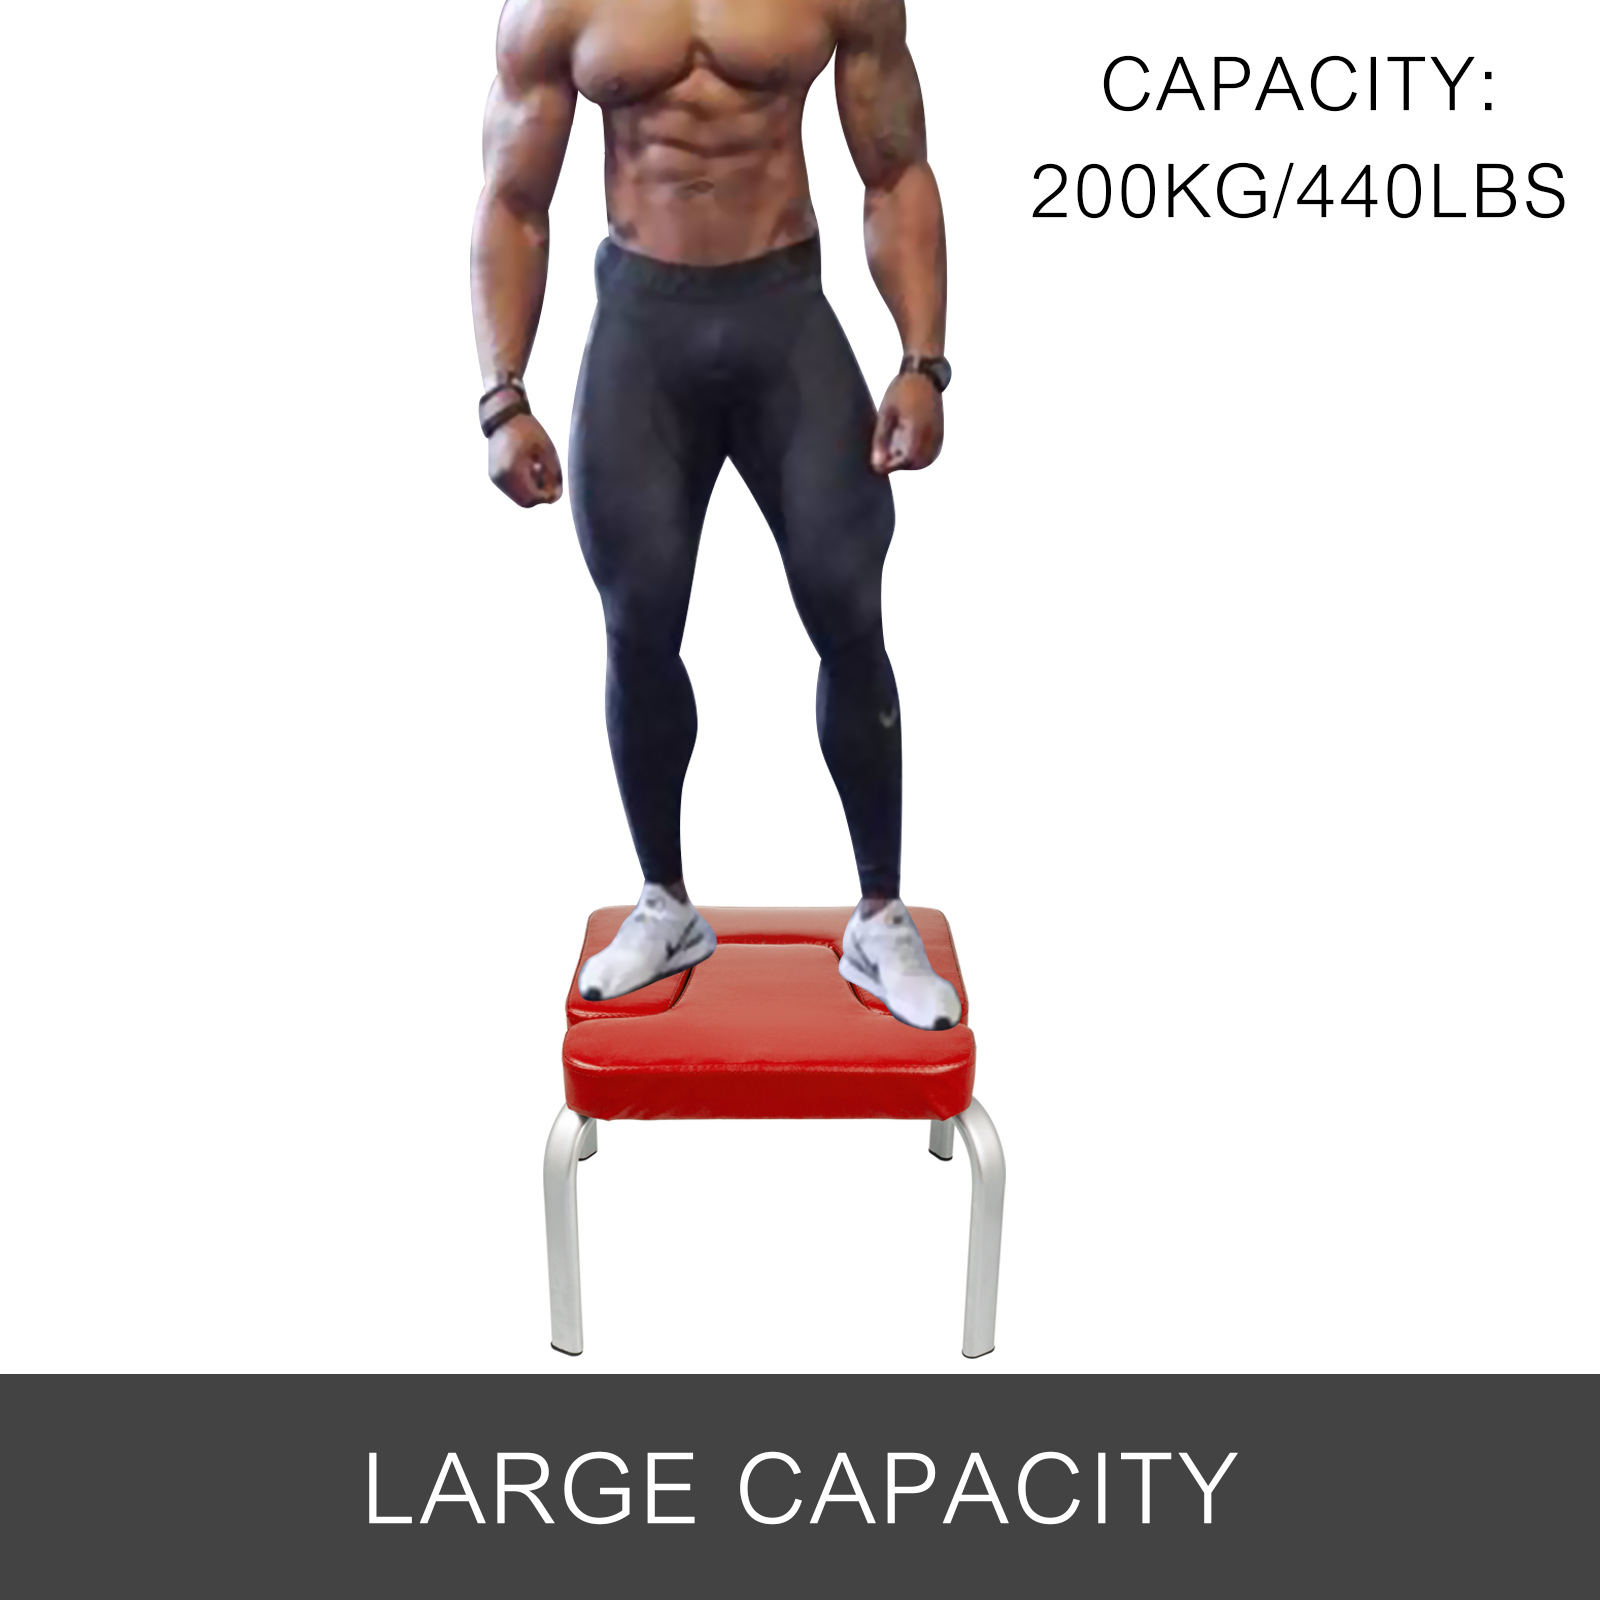 Details about   Headstand Bench Fitness Yoga Handstand Chair Inversion Table Exercise Training 